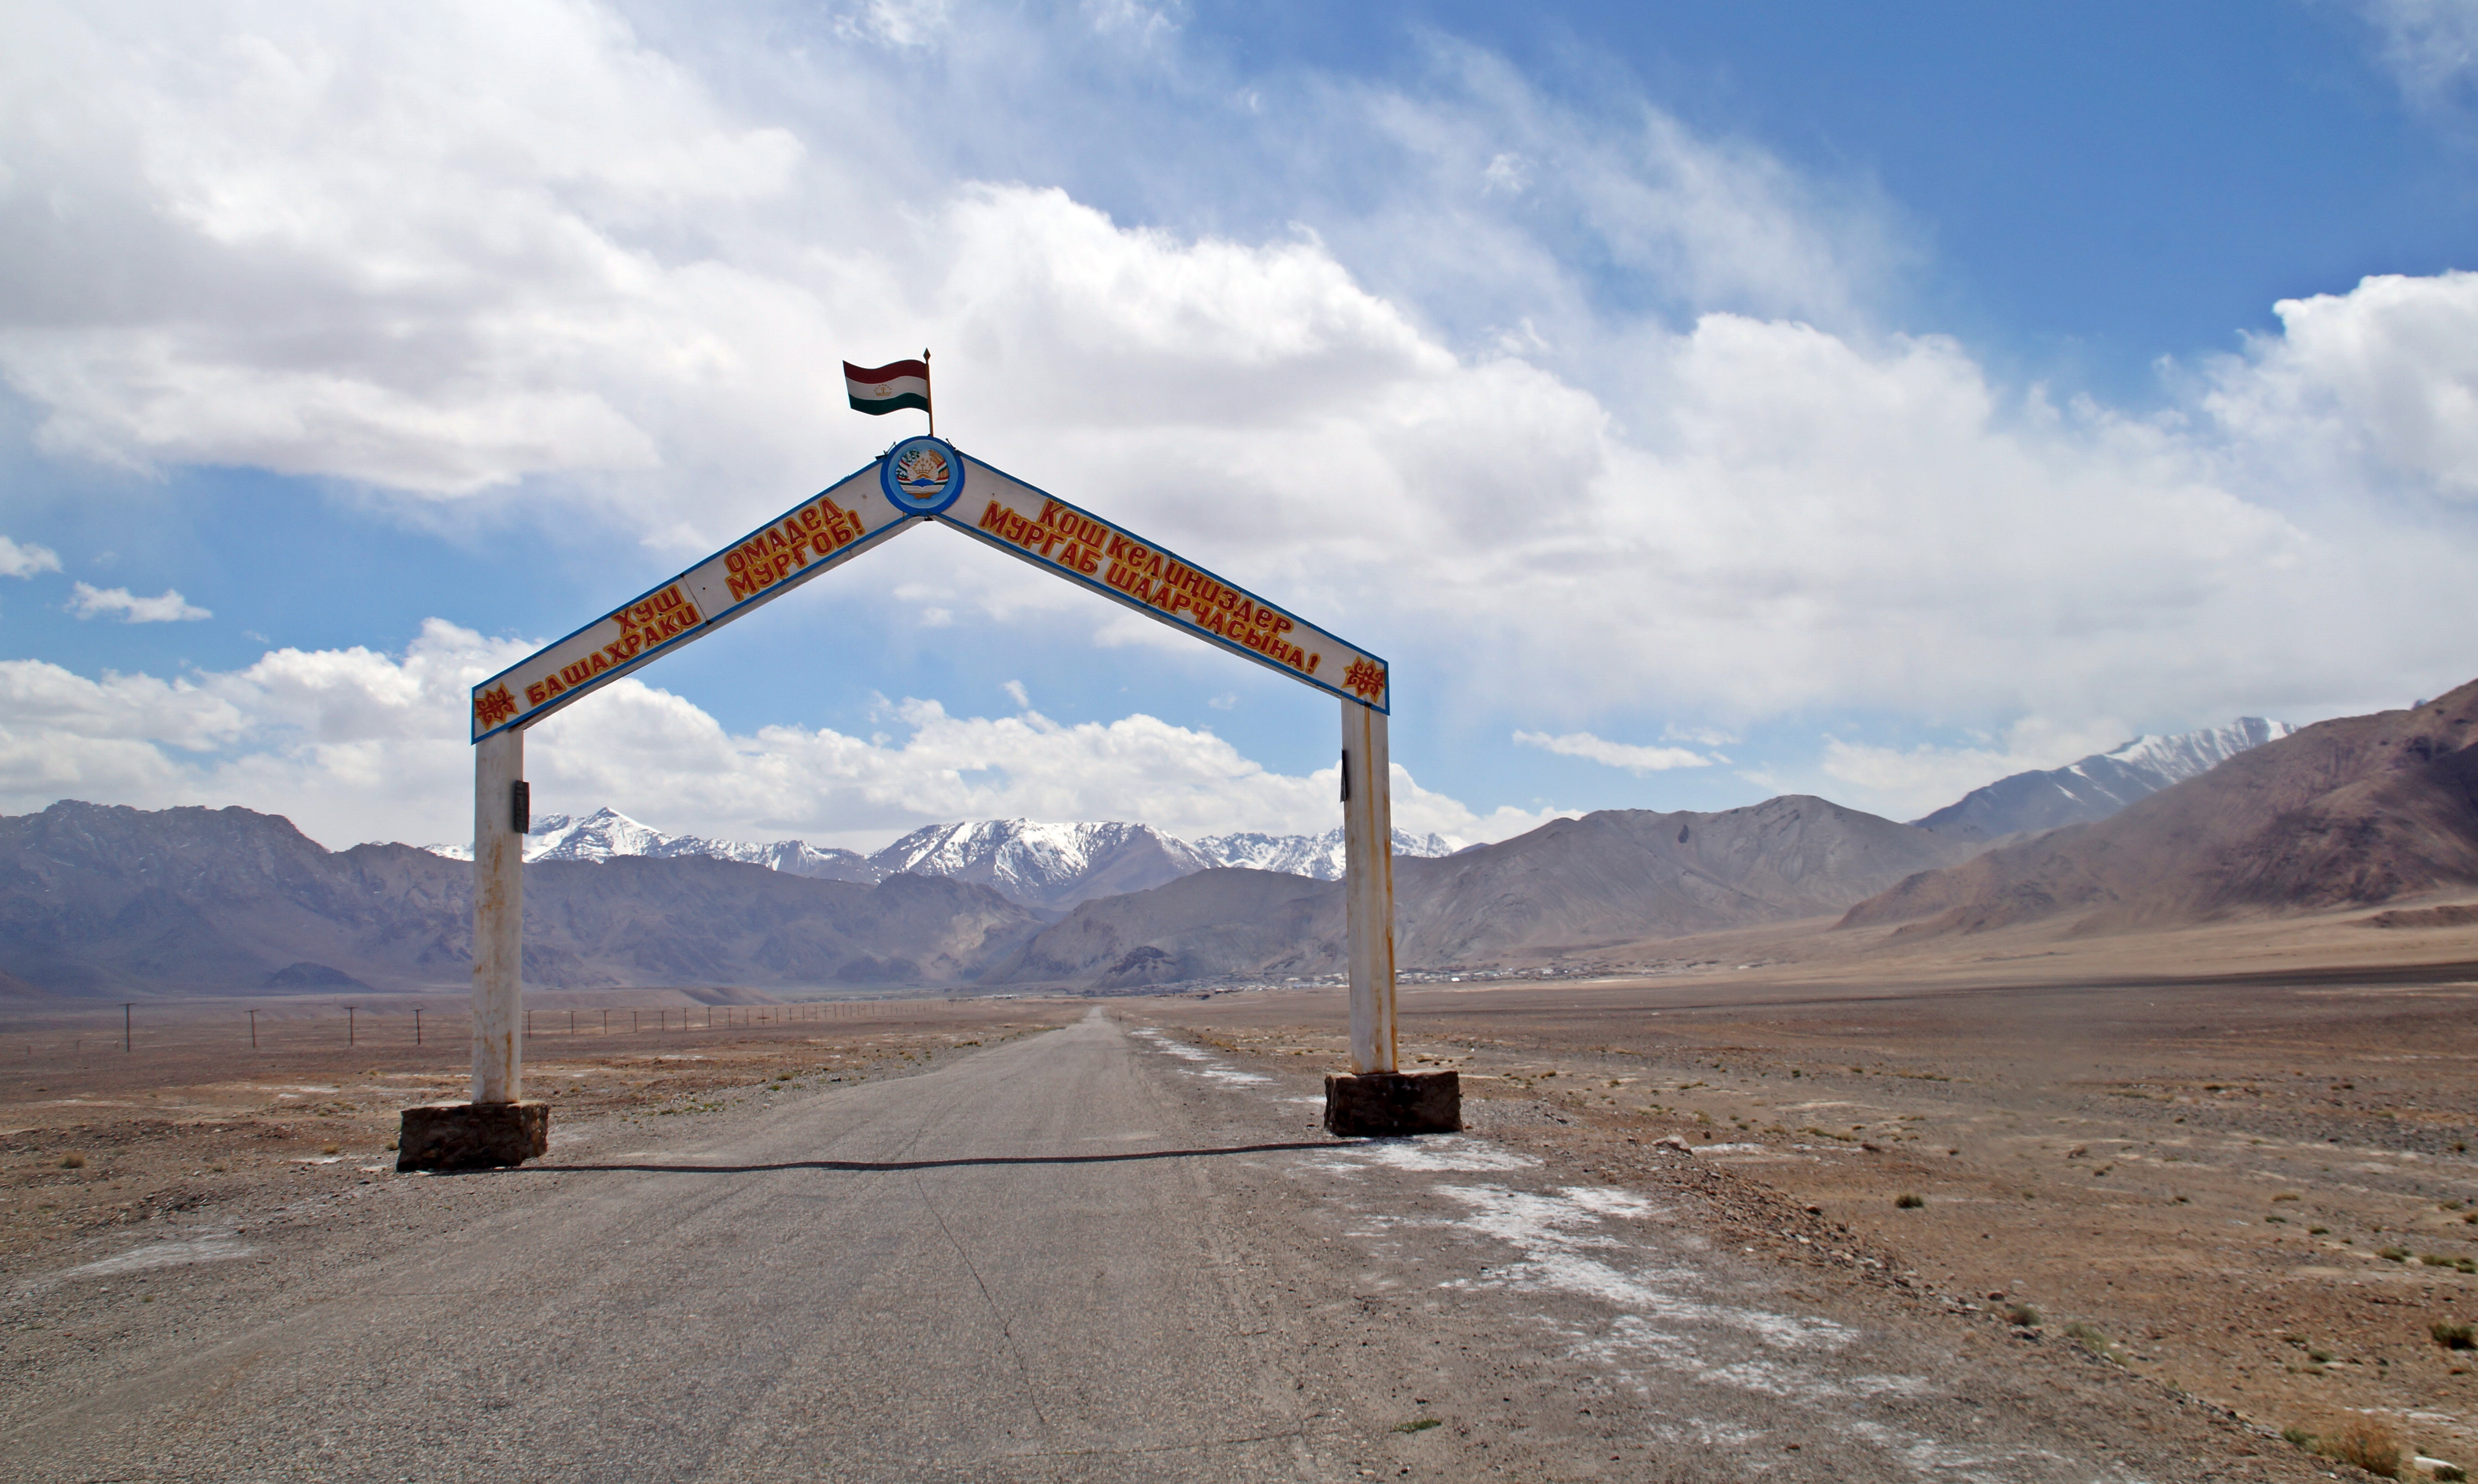 Arriving in Murghab